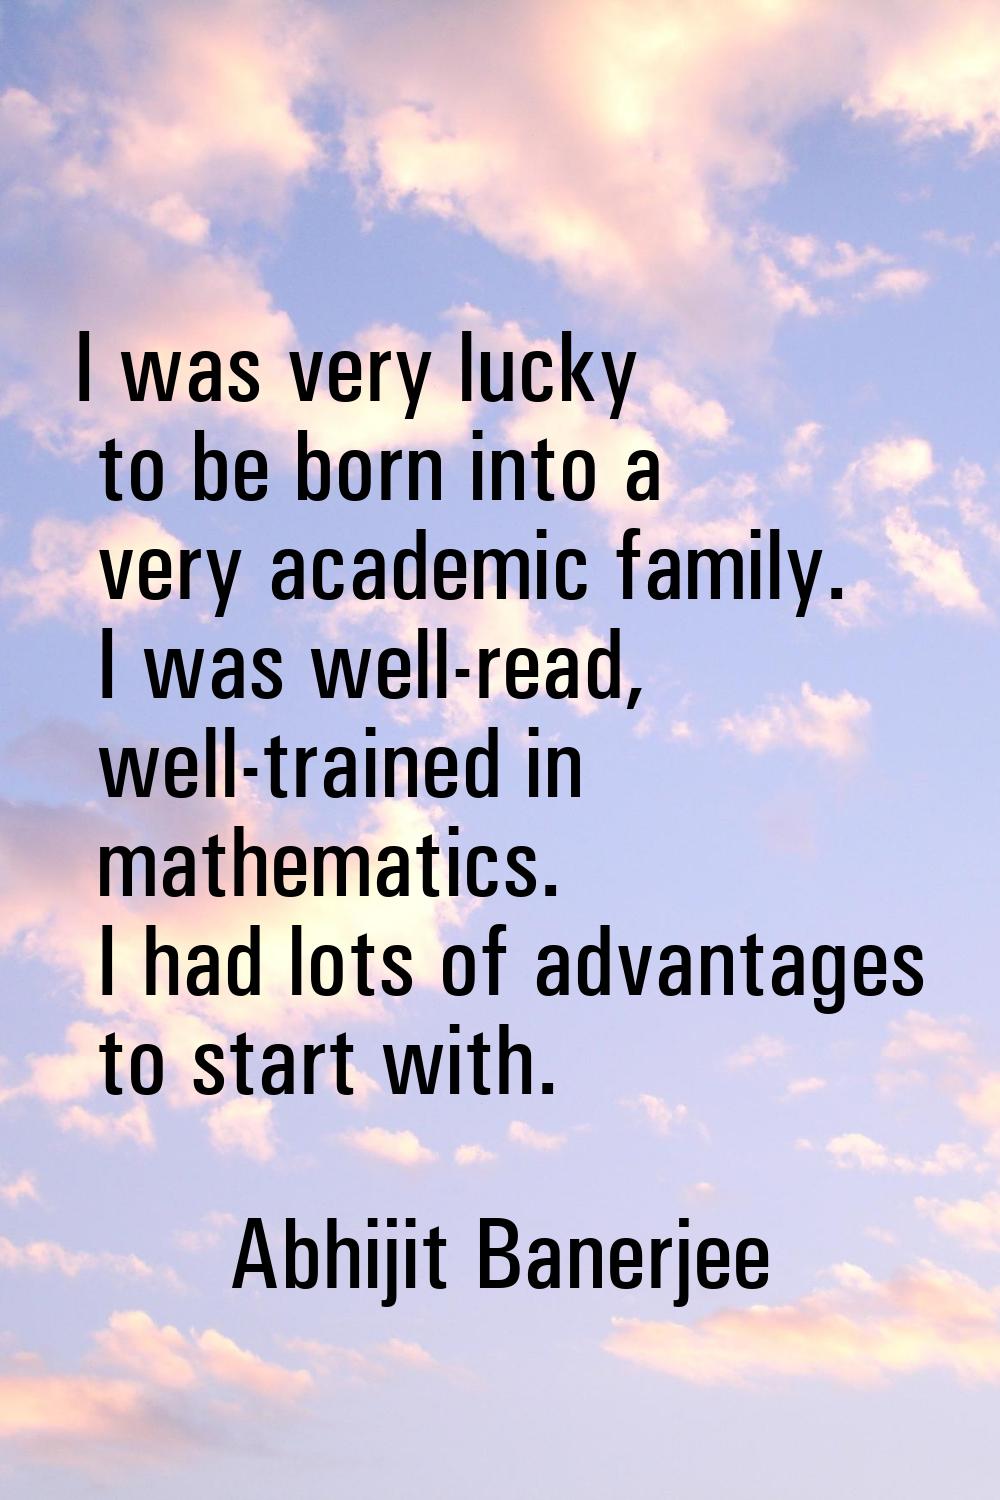 I was very lucky to be born into a very academic family. I was well-read, well-trained in mathemati